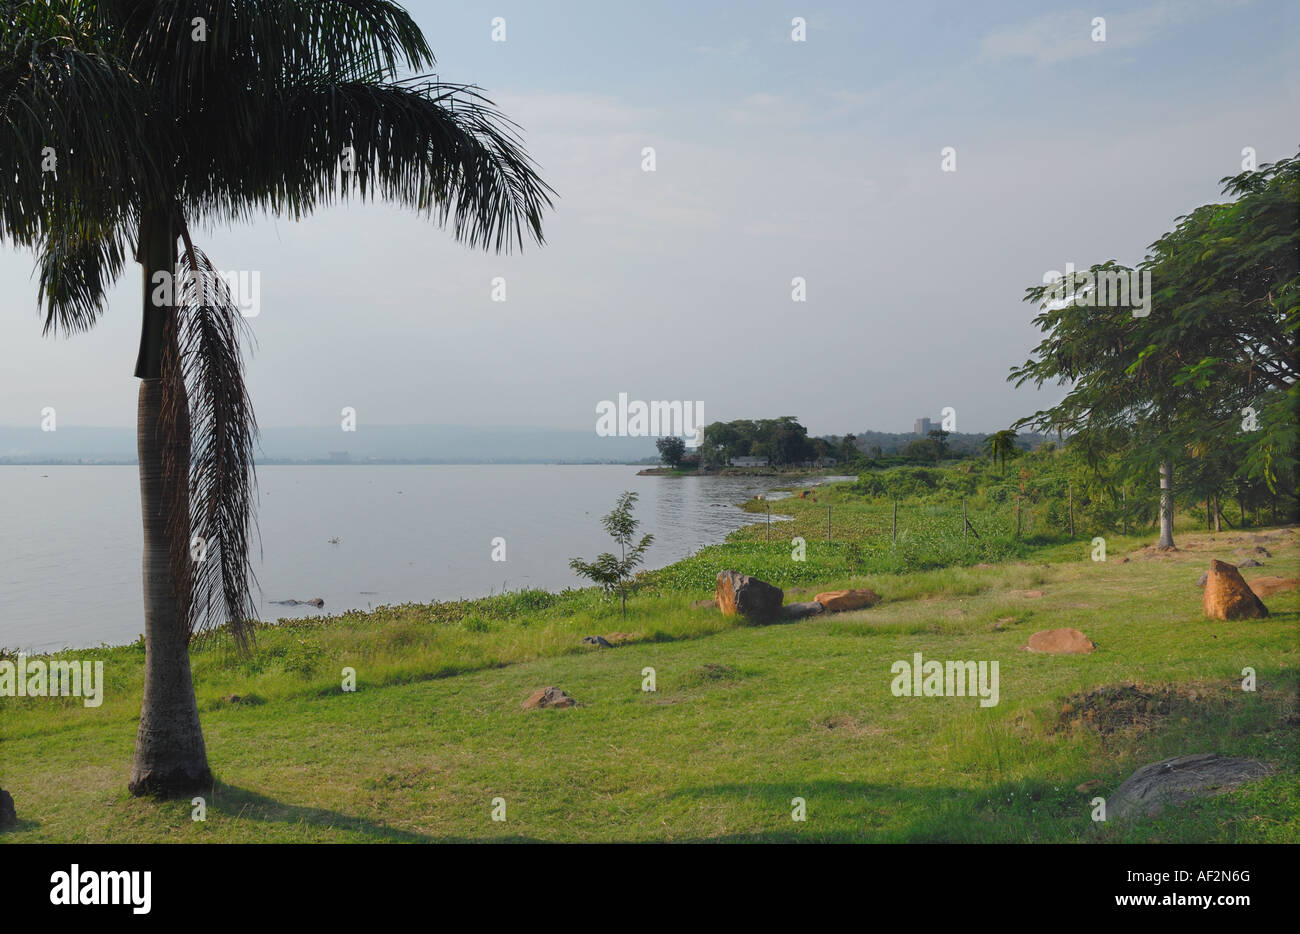 Palm trees on the shore of Lake Victoria on the Winam or Kavirondo Gulf just outside the town of Kisumu Kenya East Africa Stock Photo